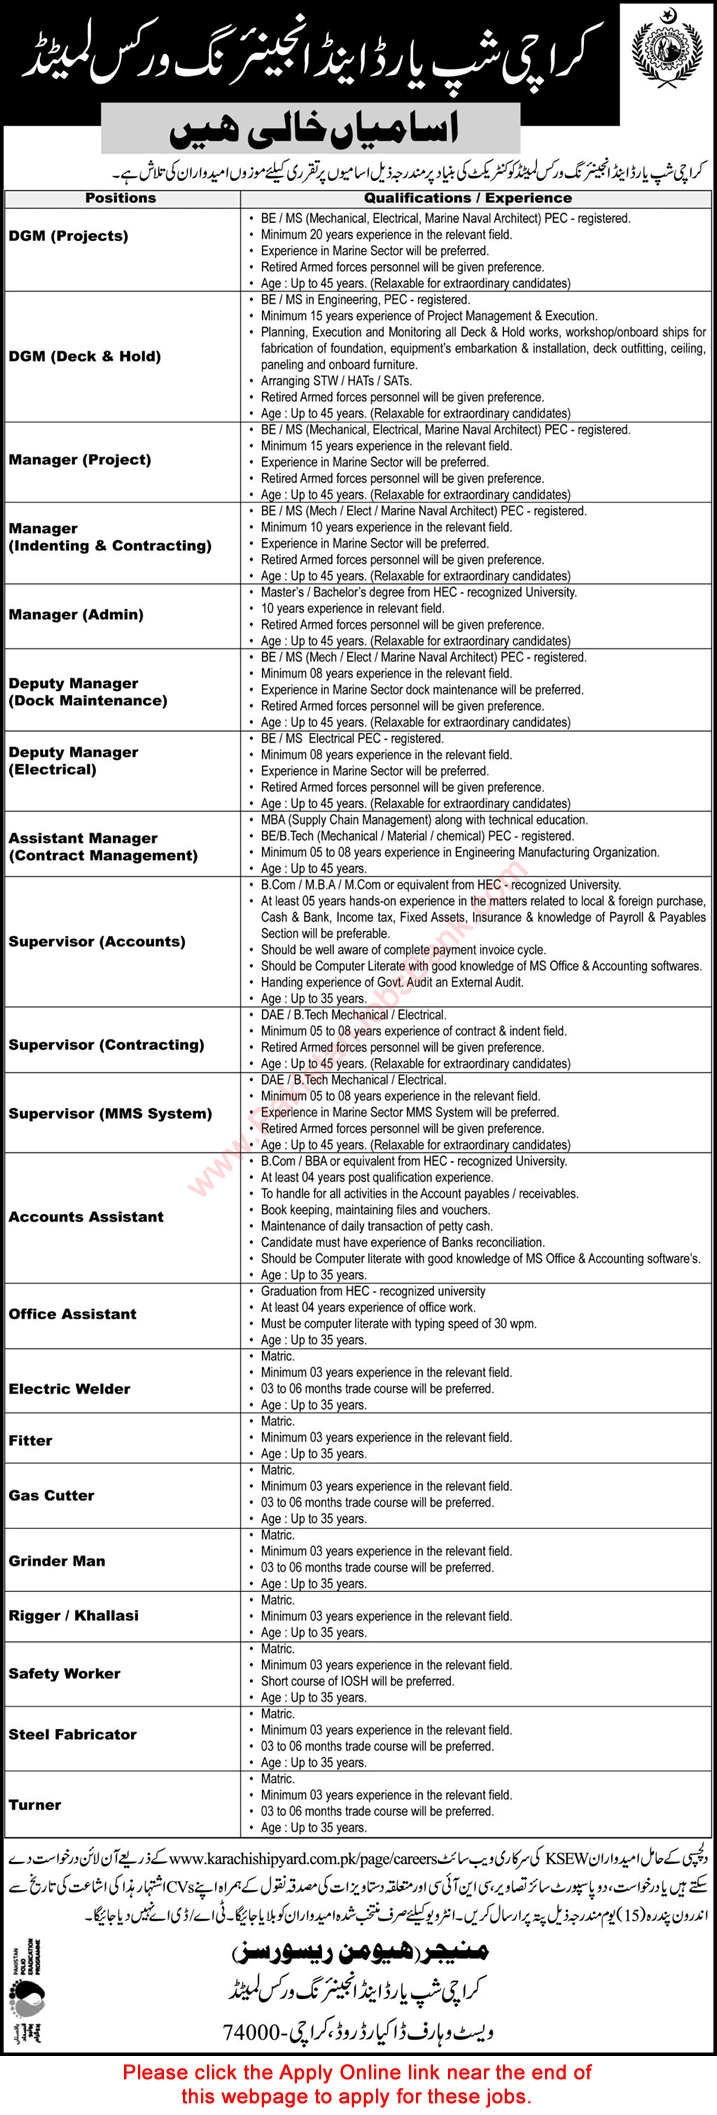 Karachi Shipyard and Engineering Works Jobs February 2022 March Online Apply Assistant Managers & Others KSEW Latest